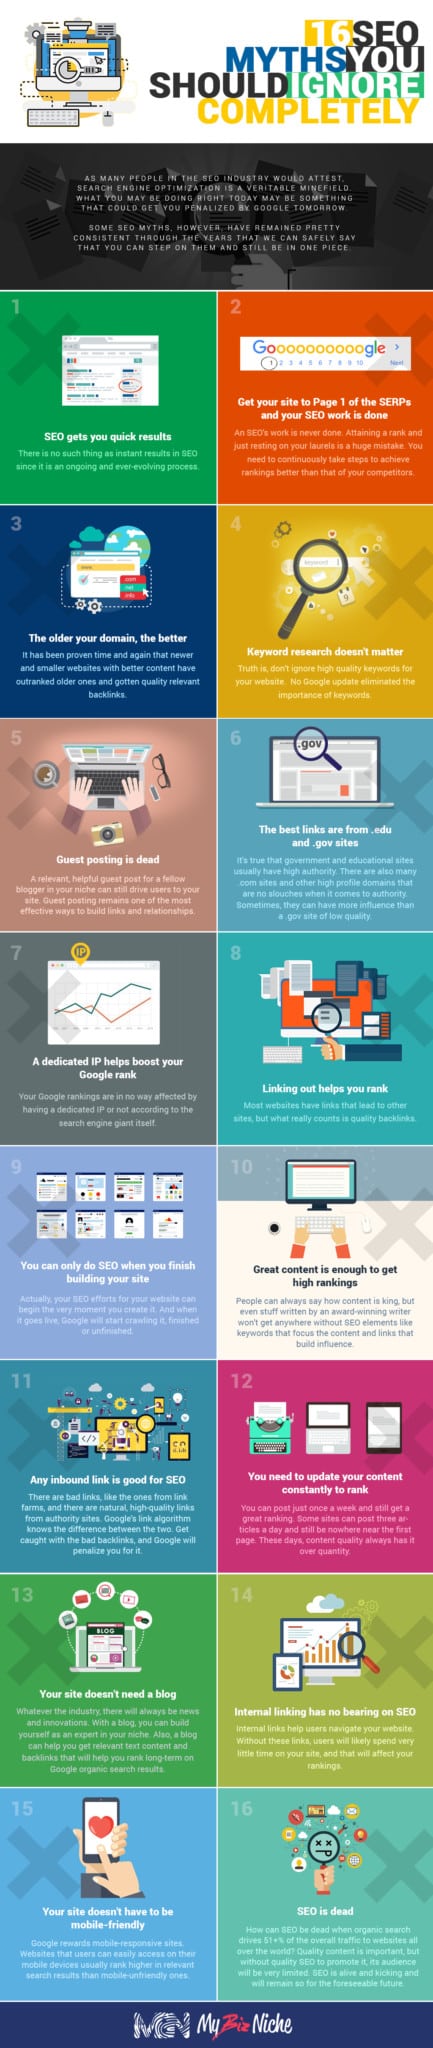 16 SEO Myths You Should Ignore Completely Infographic